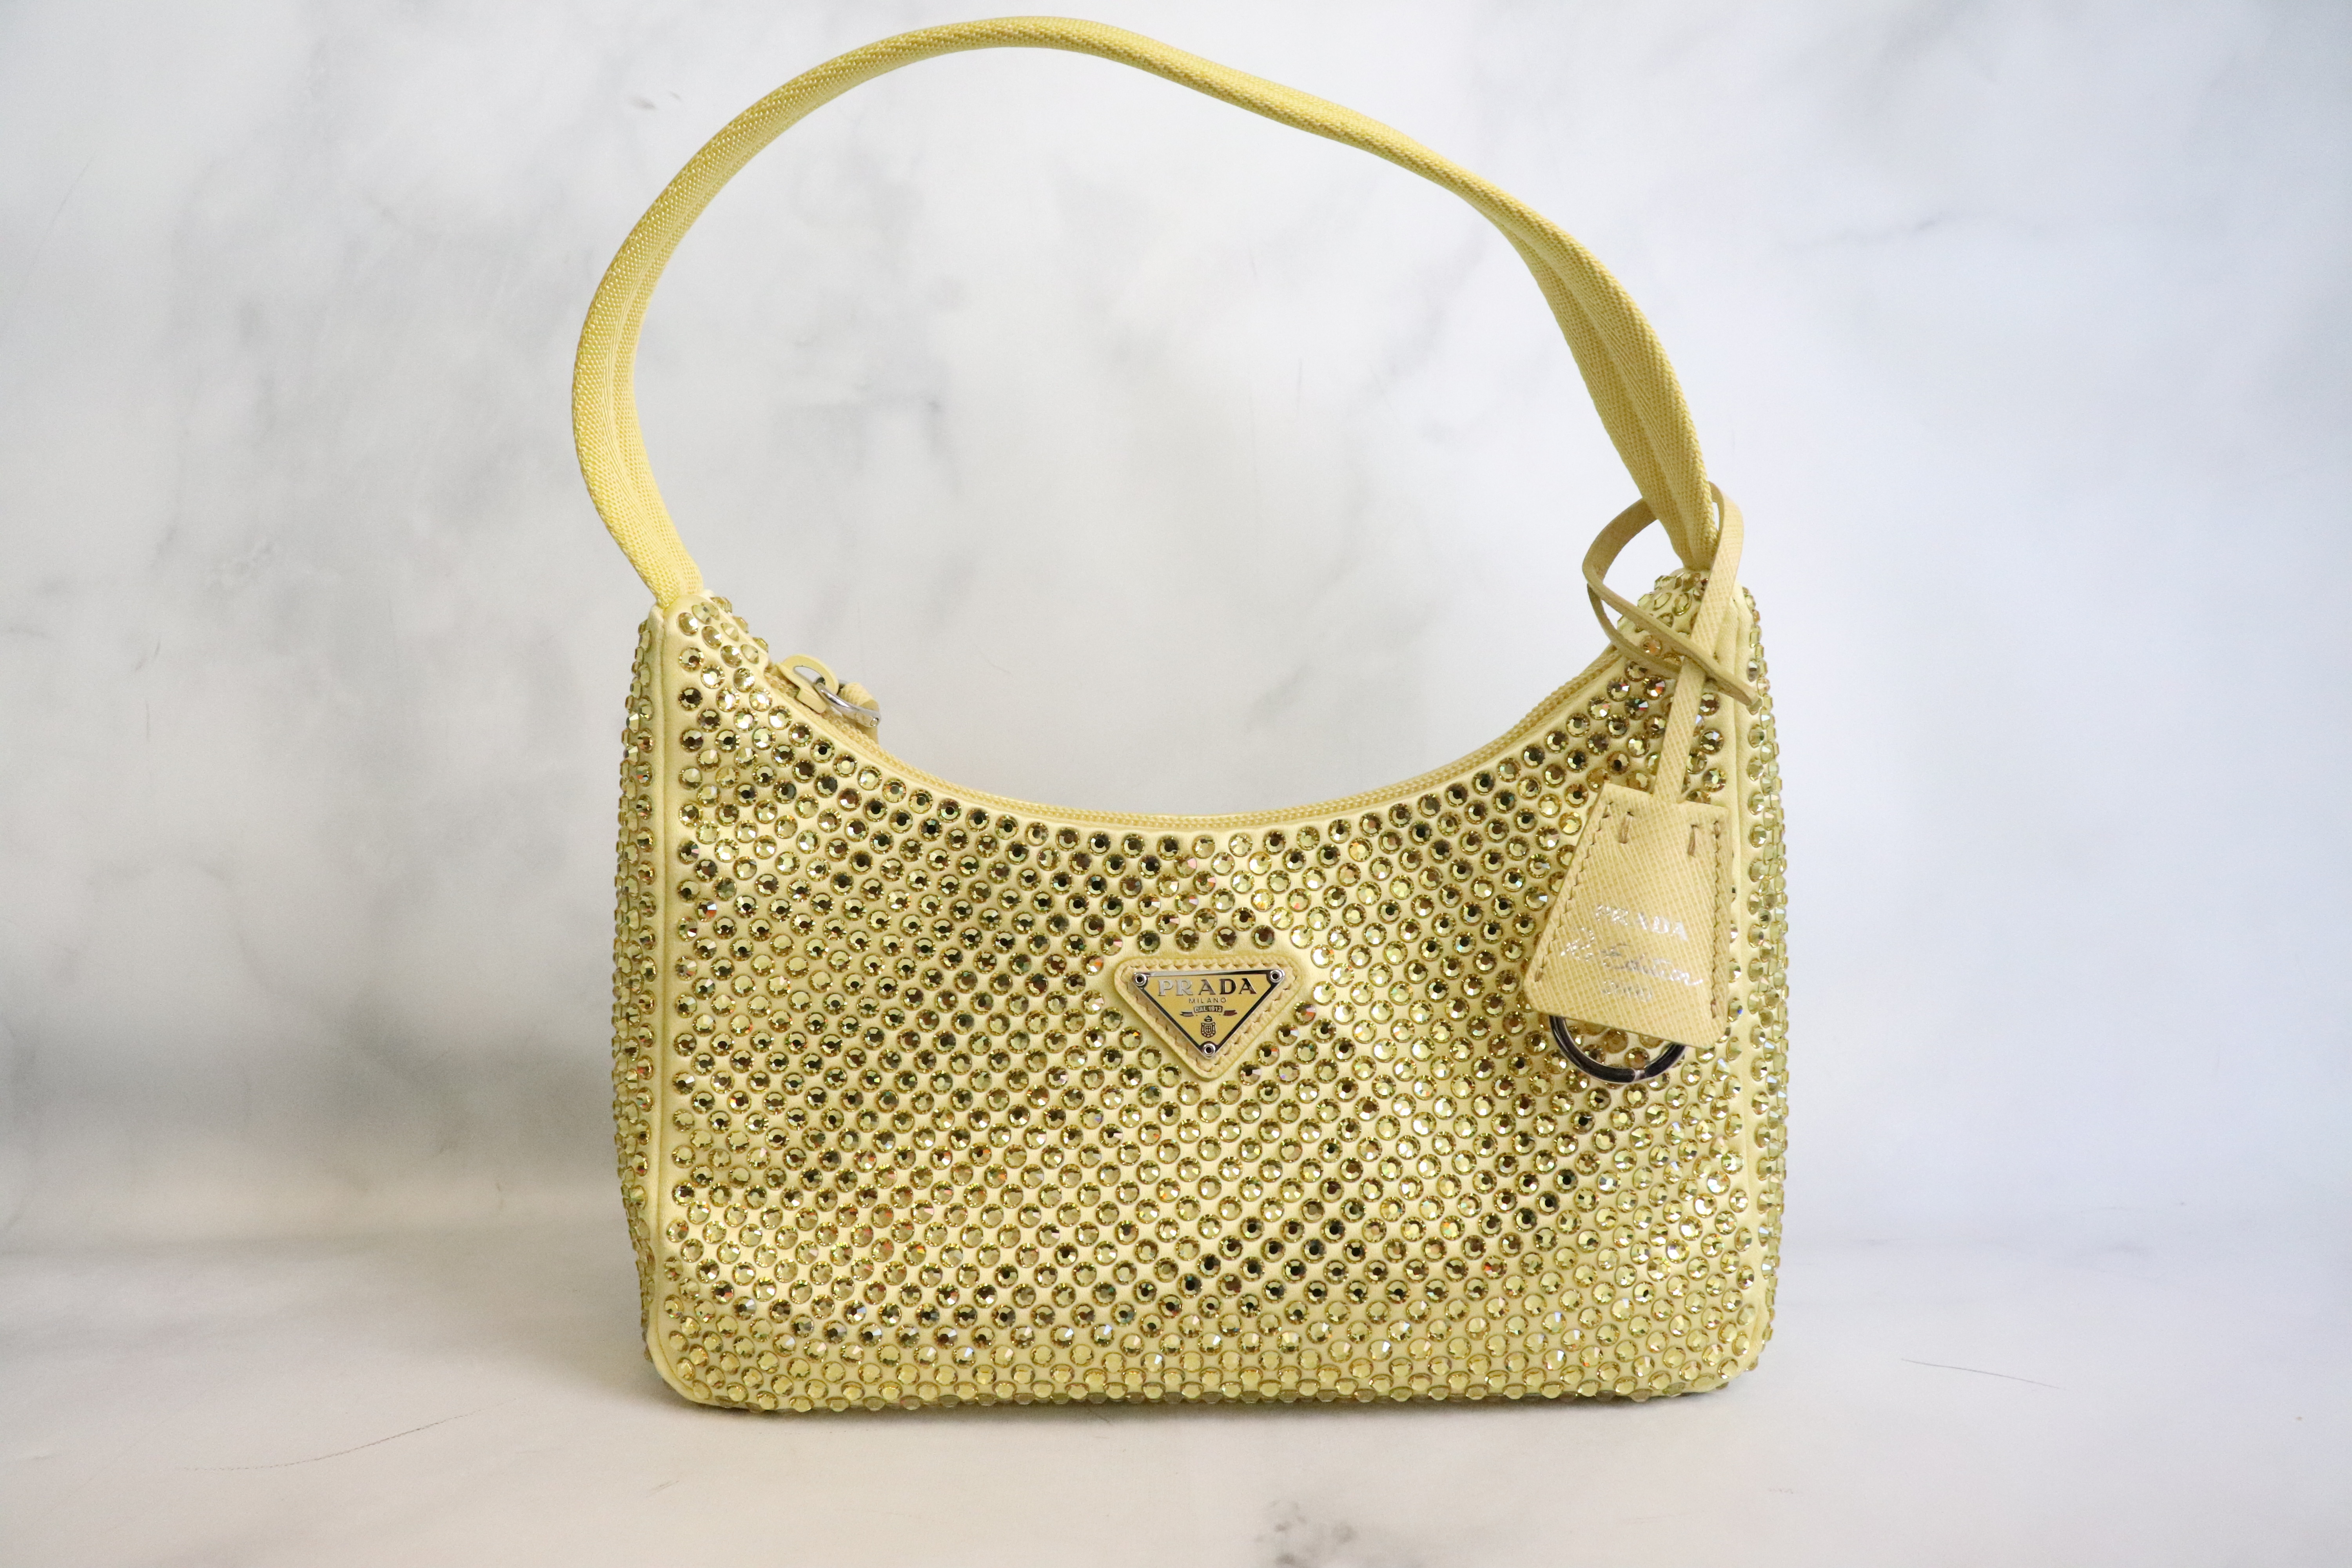 Prada Re-edition, Yellow with Crystals, New in Dustbag - Julia Rose Boston